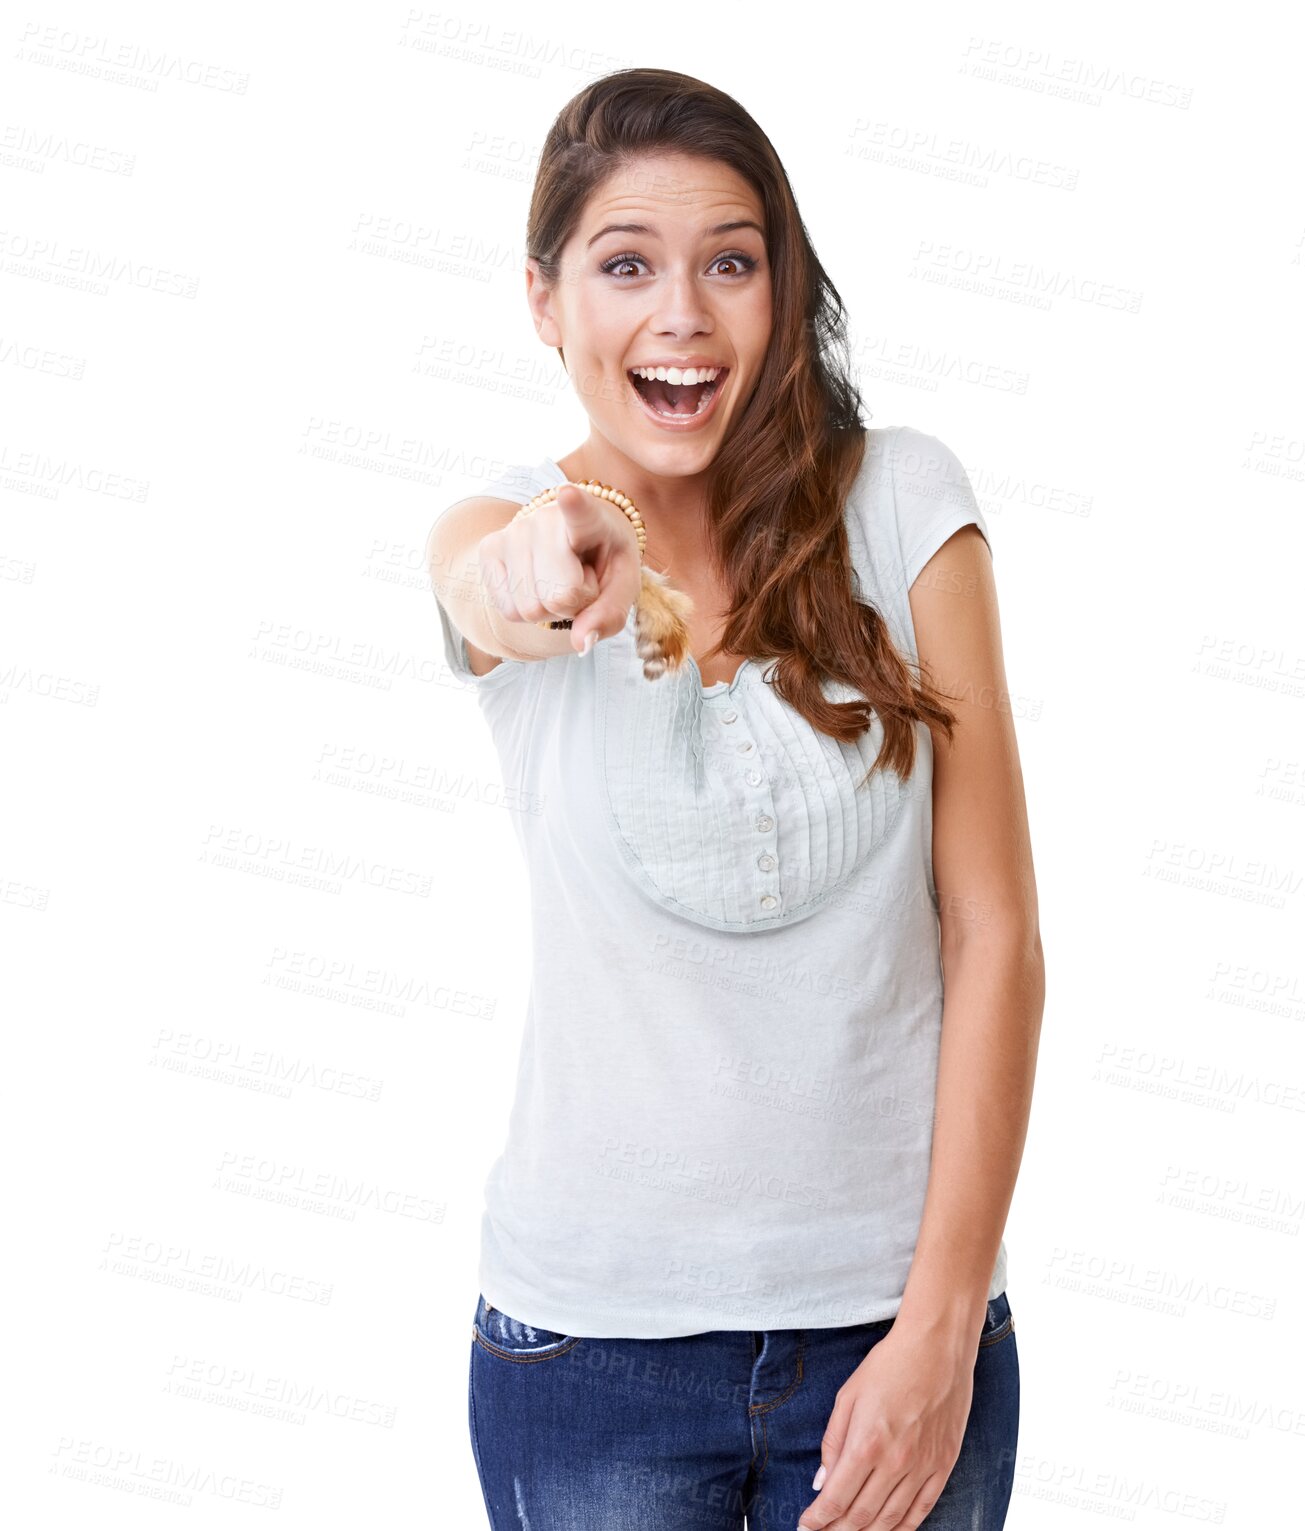 Buy stock photo Pointing to you, portrait and woman with a smile, funny and lady isolated against a transparent background. Face, female person and model with hand gesture, laughing and humor with png, crazy or joke